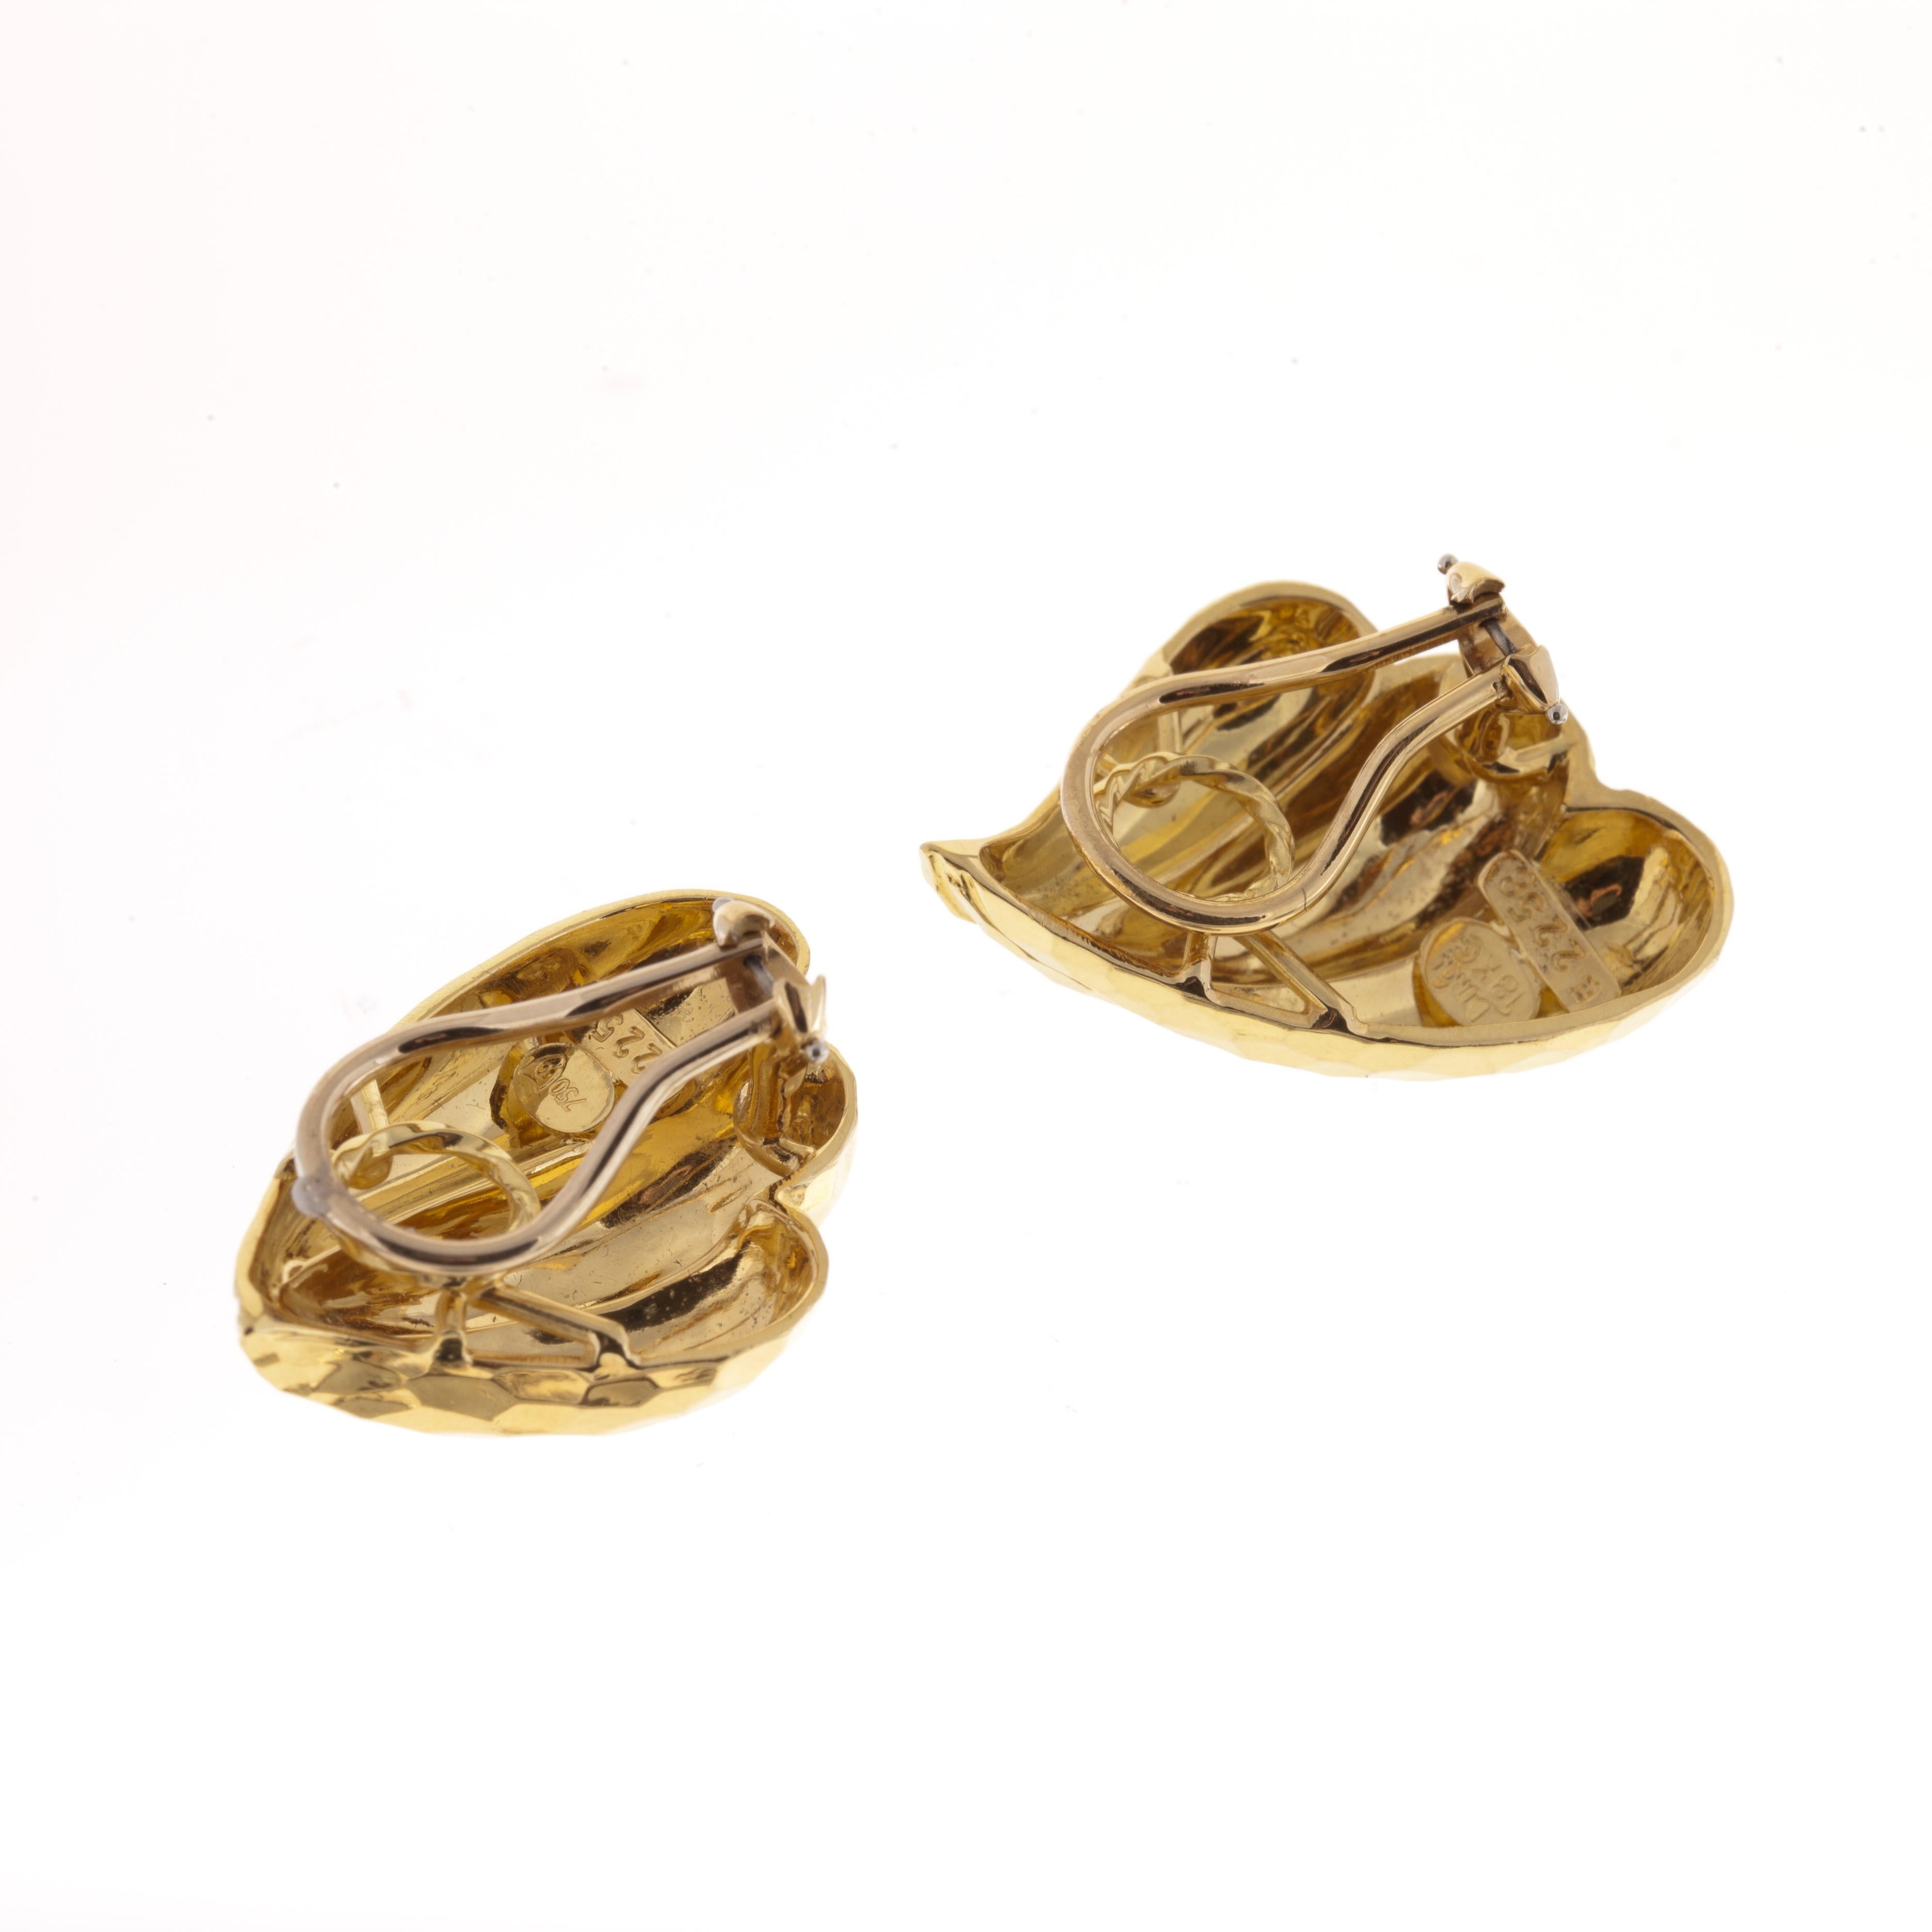 Henry Dunay earrings in 18K yellow hammered gold.  They are marked on the inside 